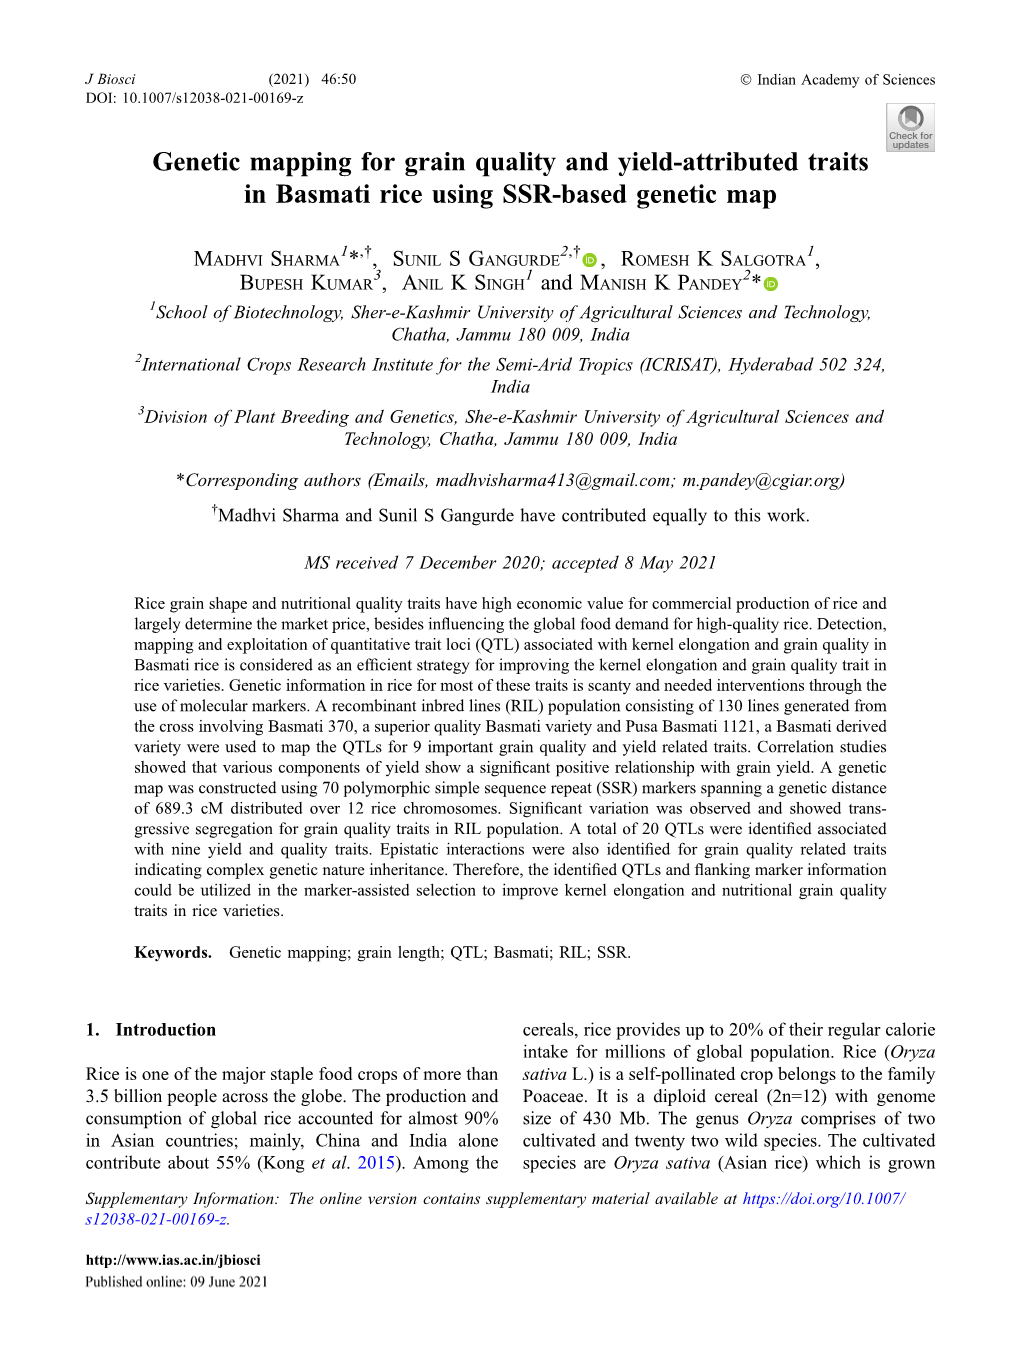 Genetic Mapping for Grain Quality and Yield-Attributed Traits in Basmati Rice Using SSR-Based Genetic Map